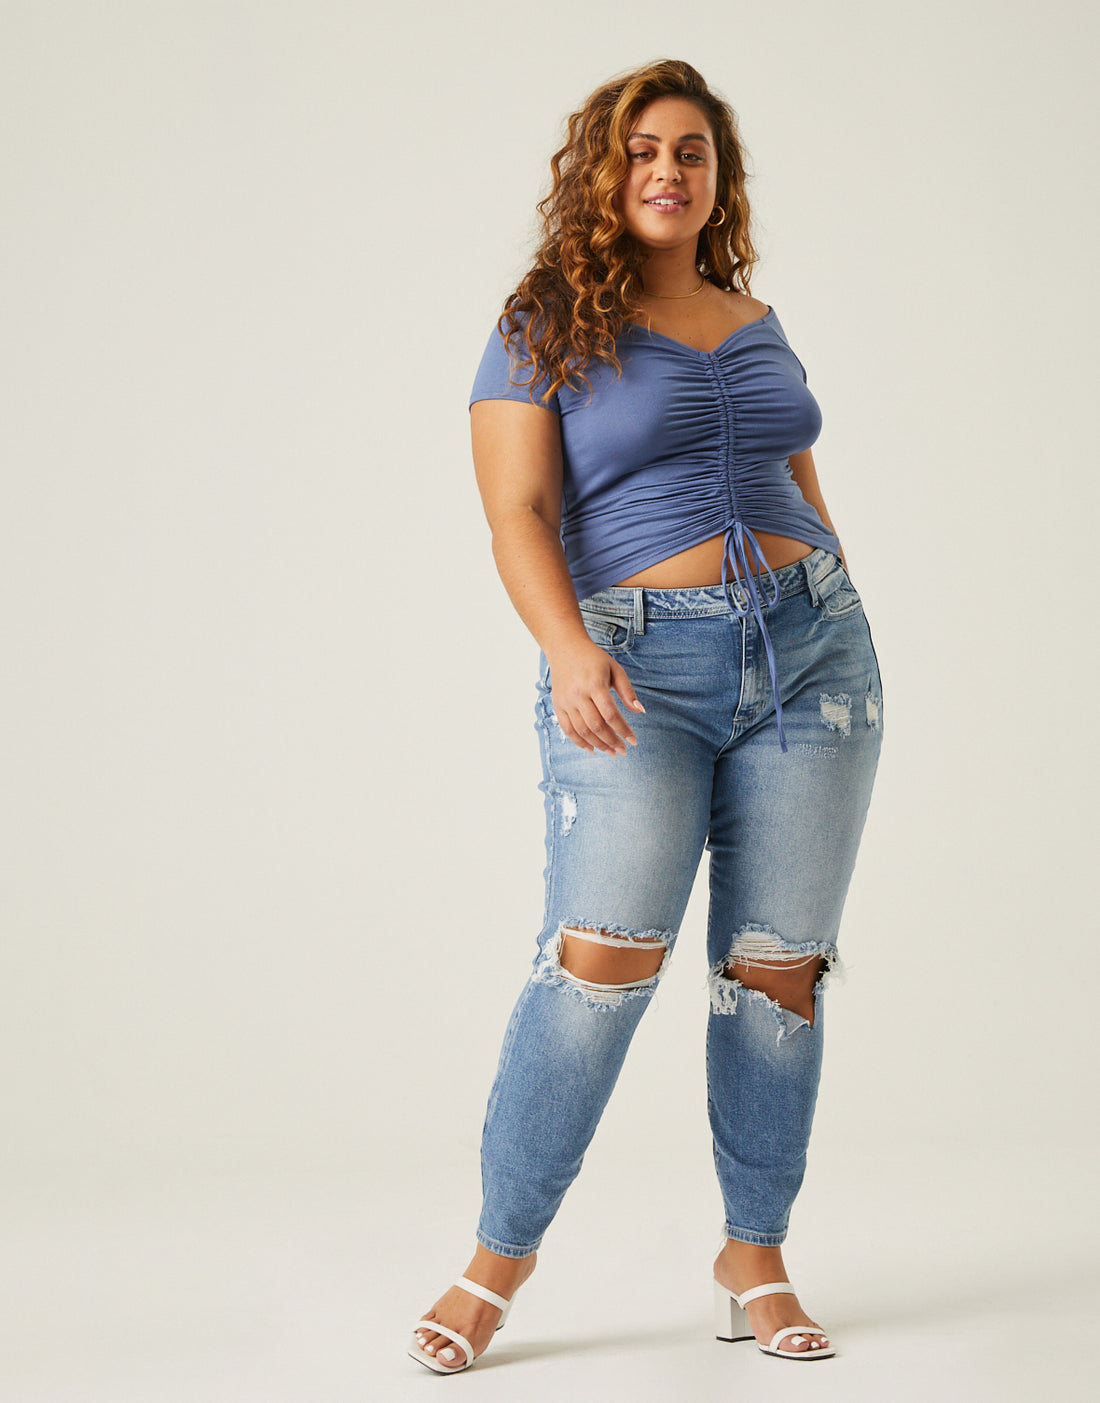 Curve Ruched Front Tee Plus Size Tops -2020AVE